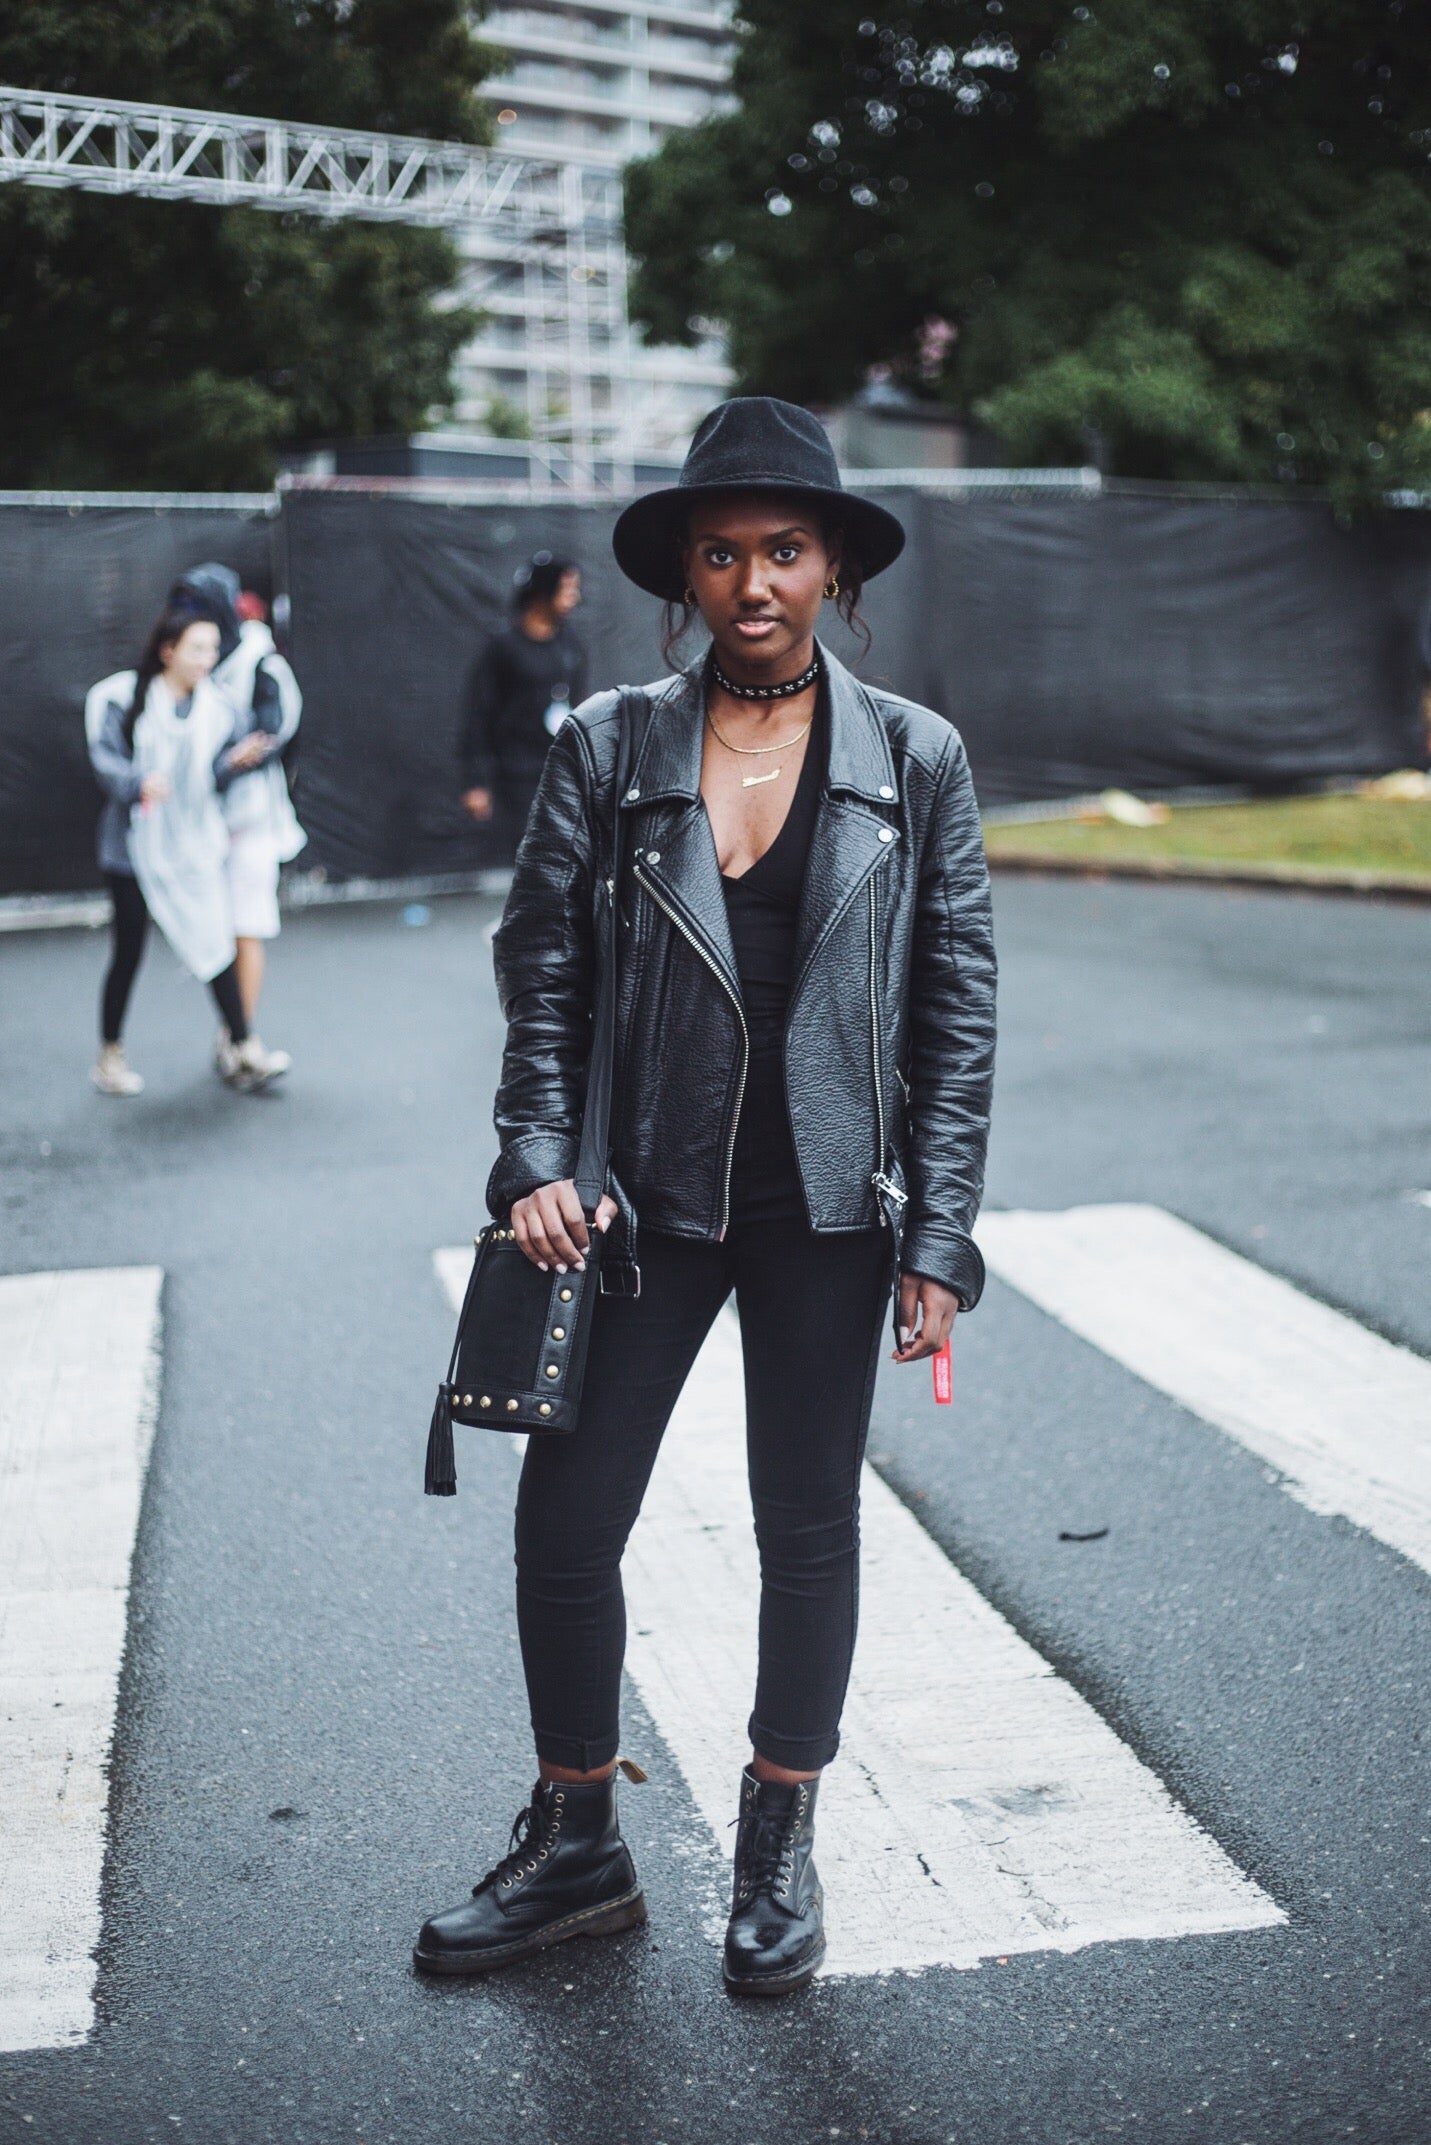 The Must-See Street Style from Made in America Festival | Essence